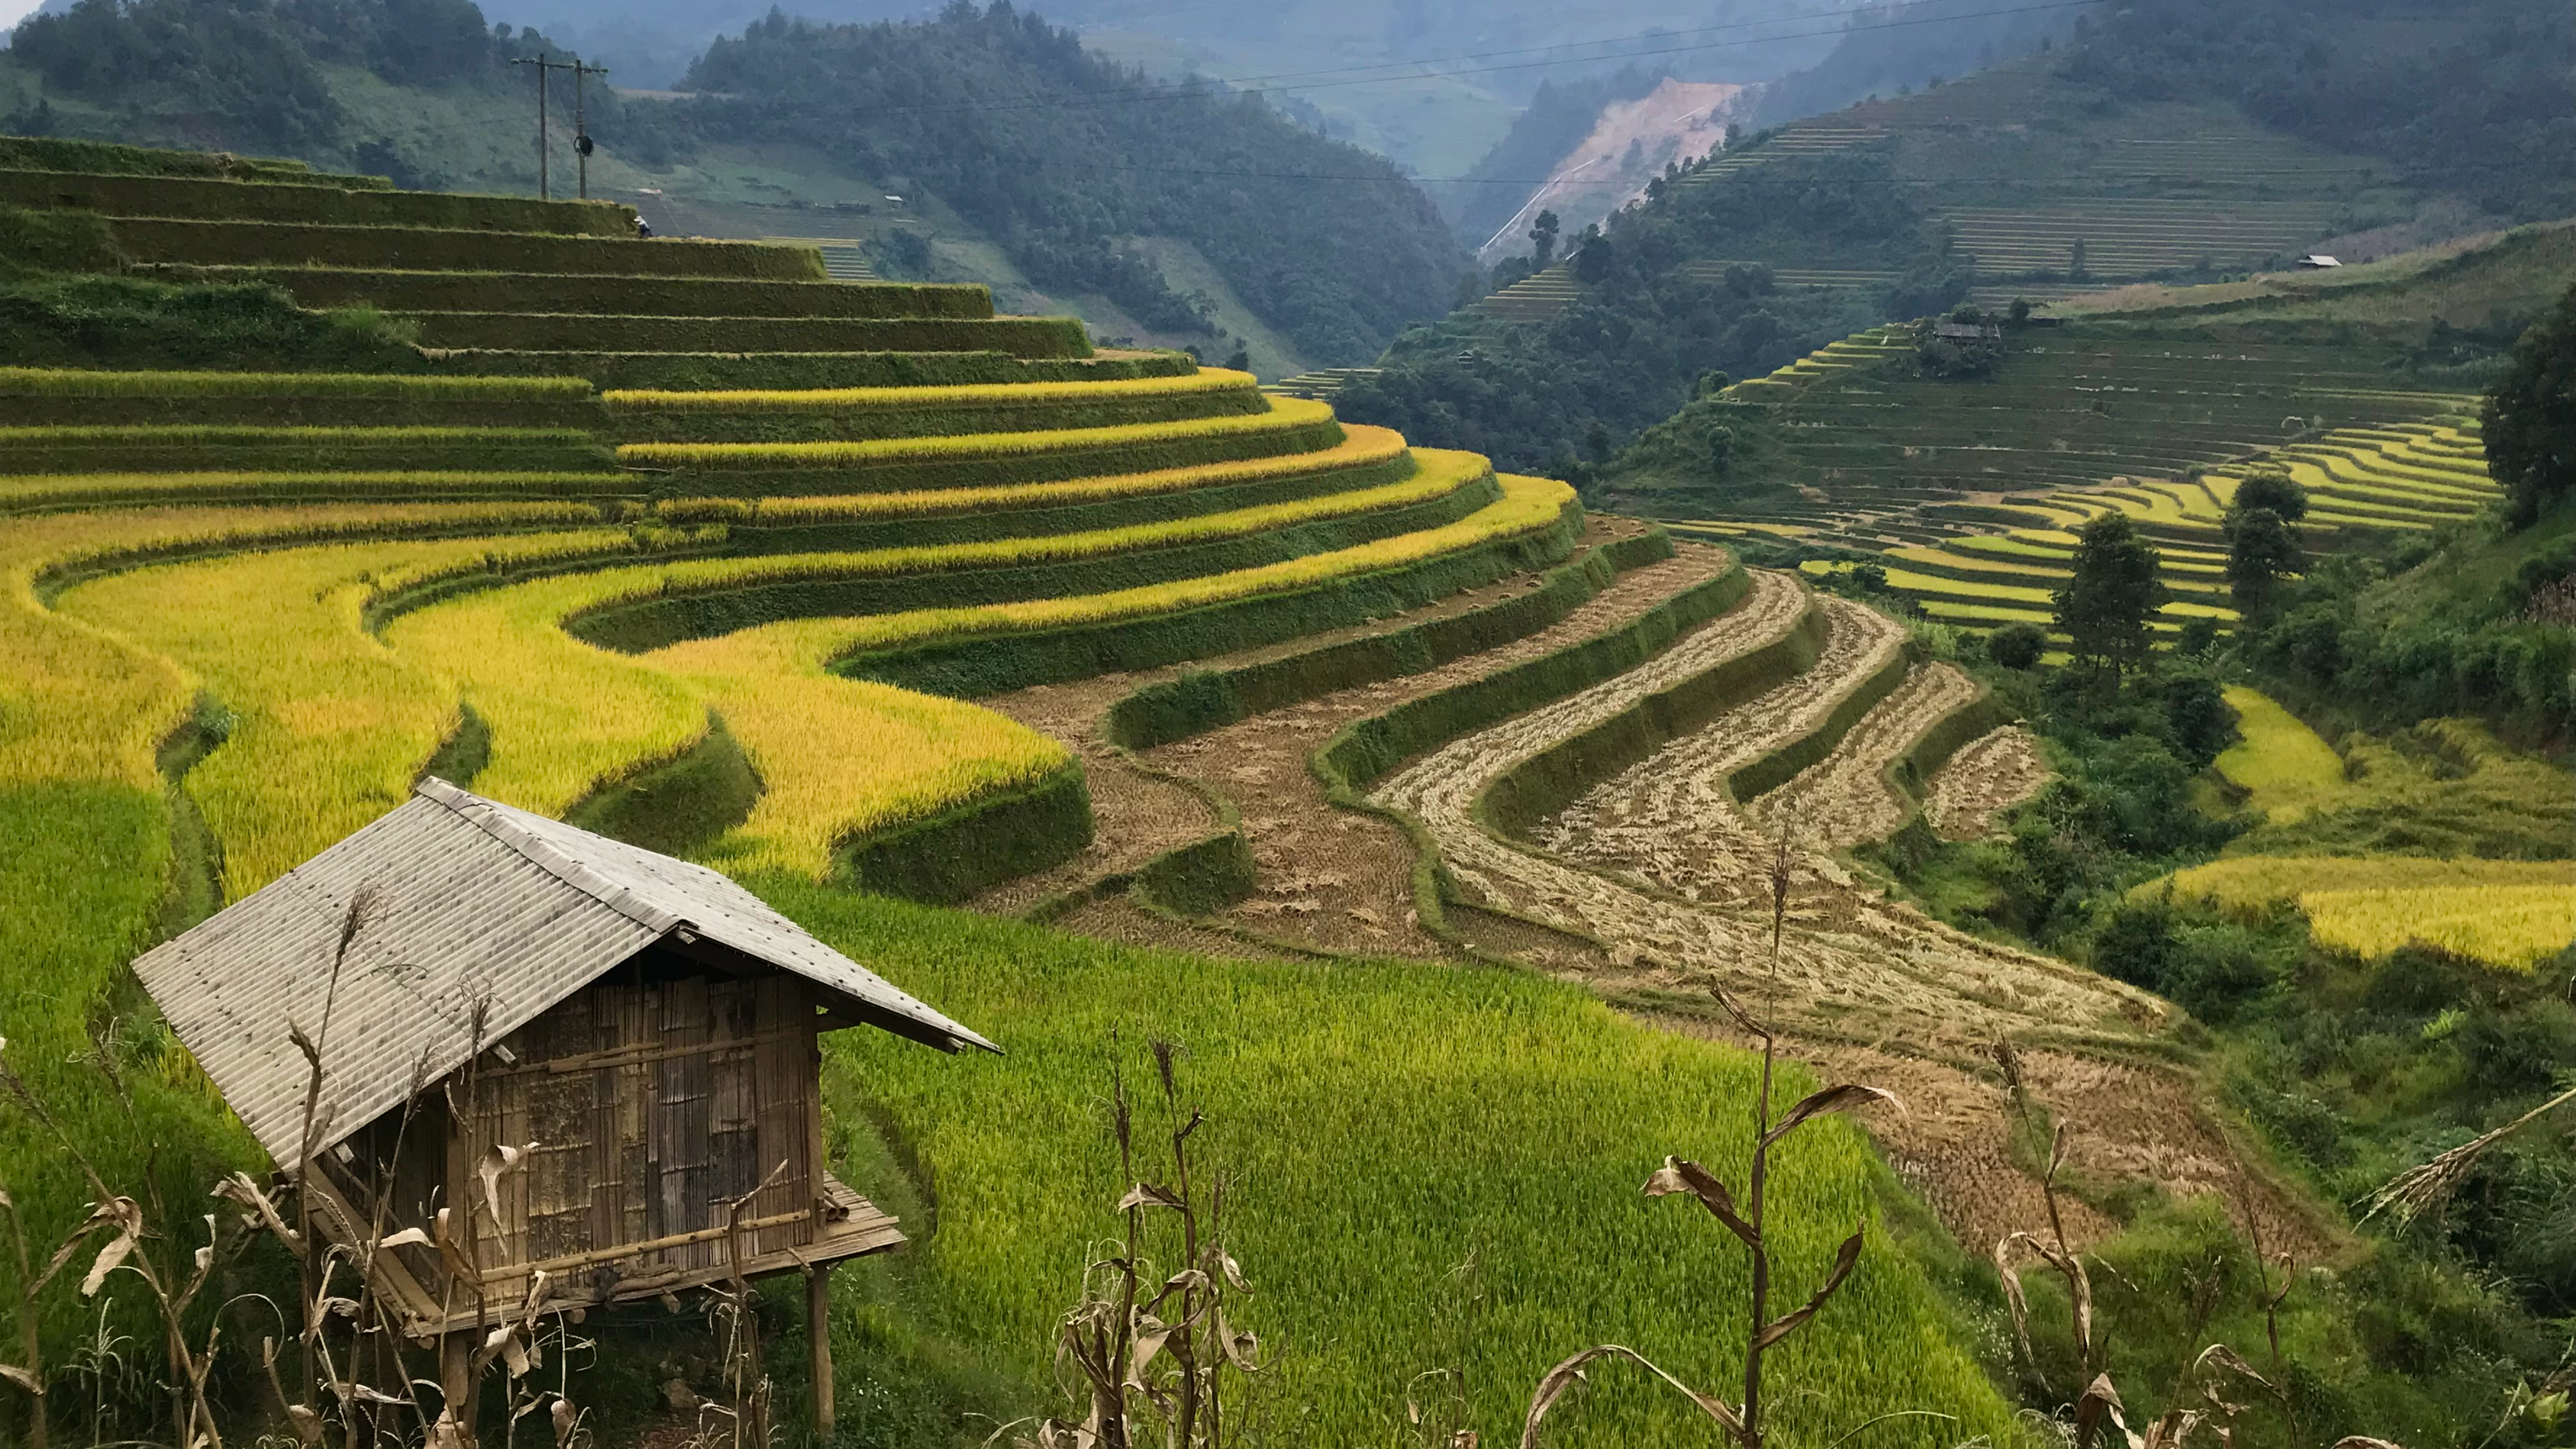 Mu Cang Chai Rice Fields: Go Dig for Gold